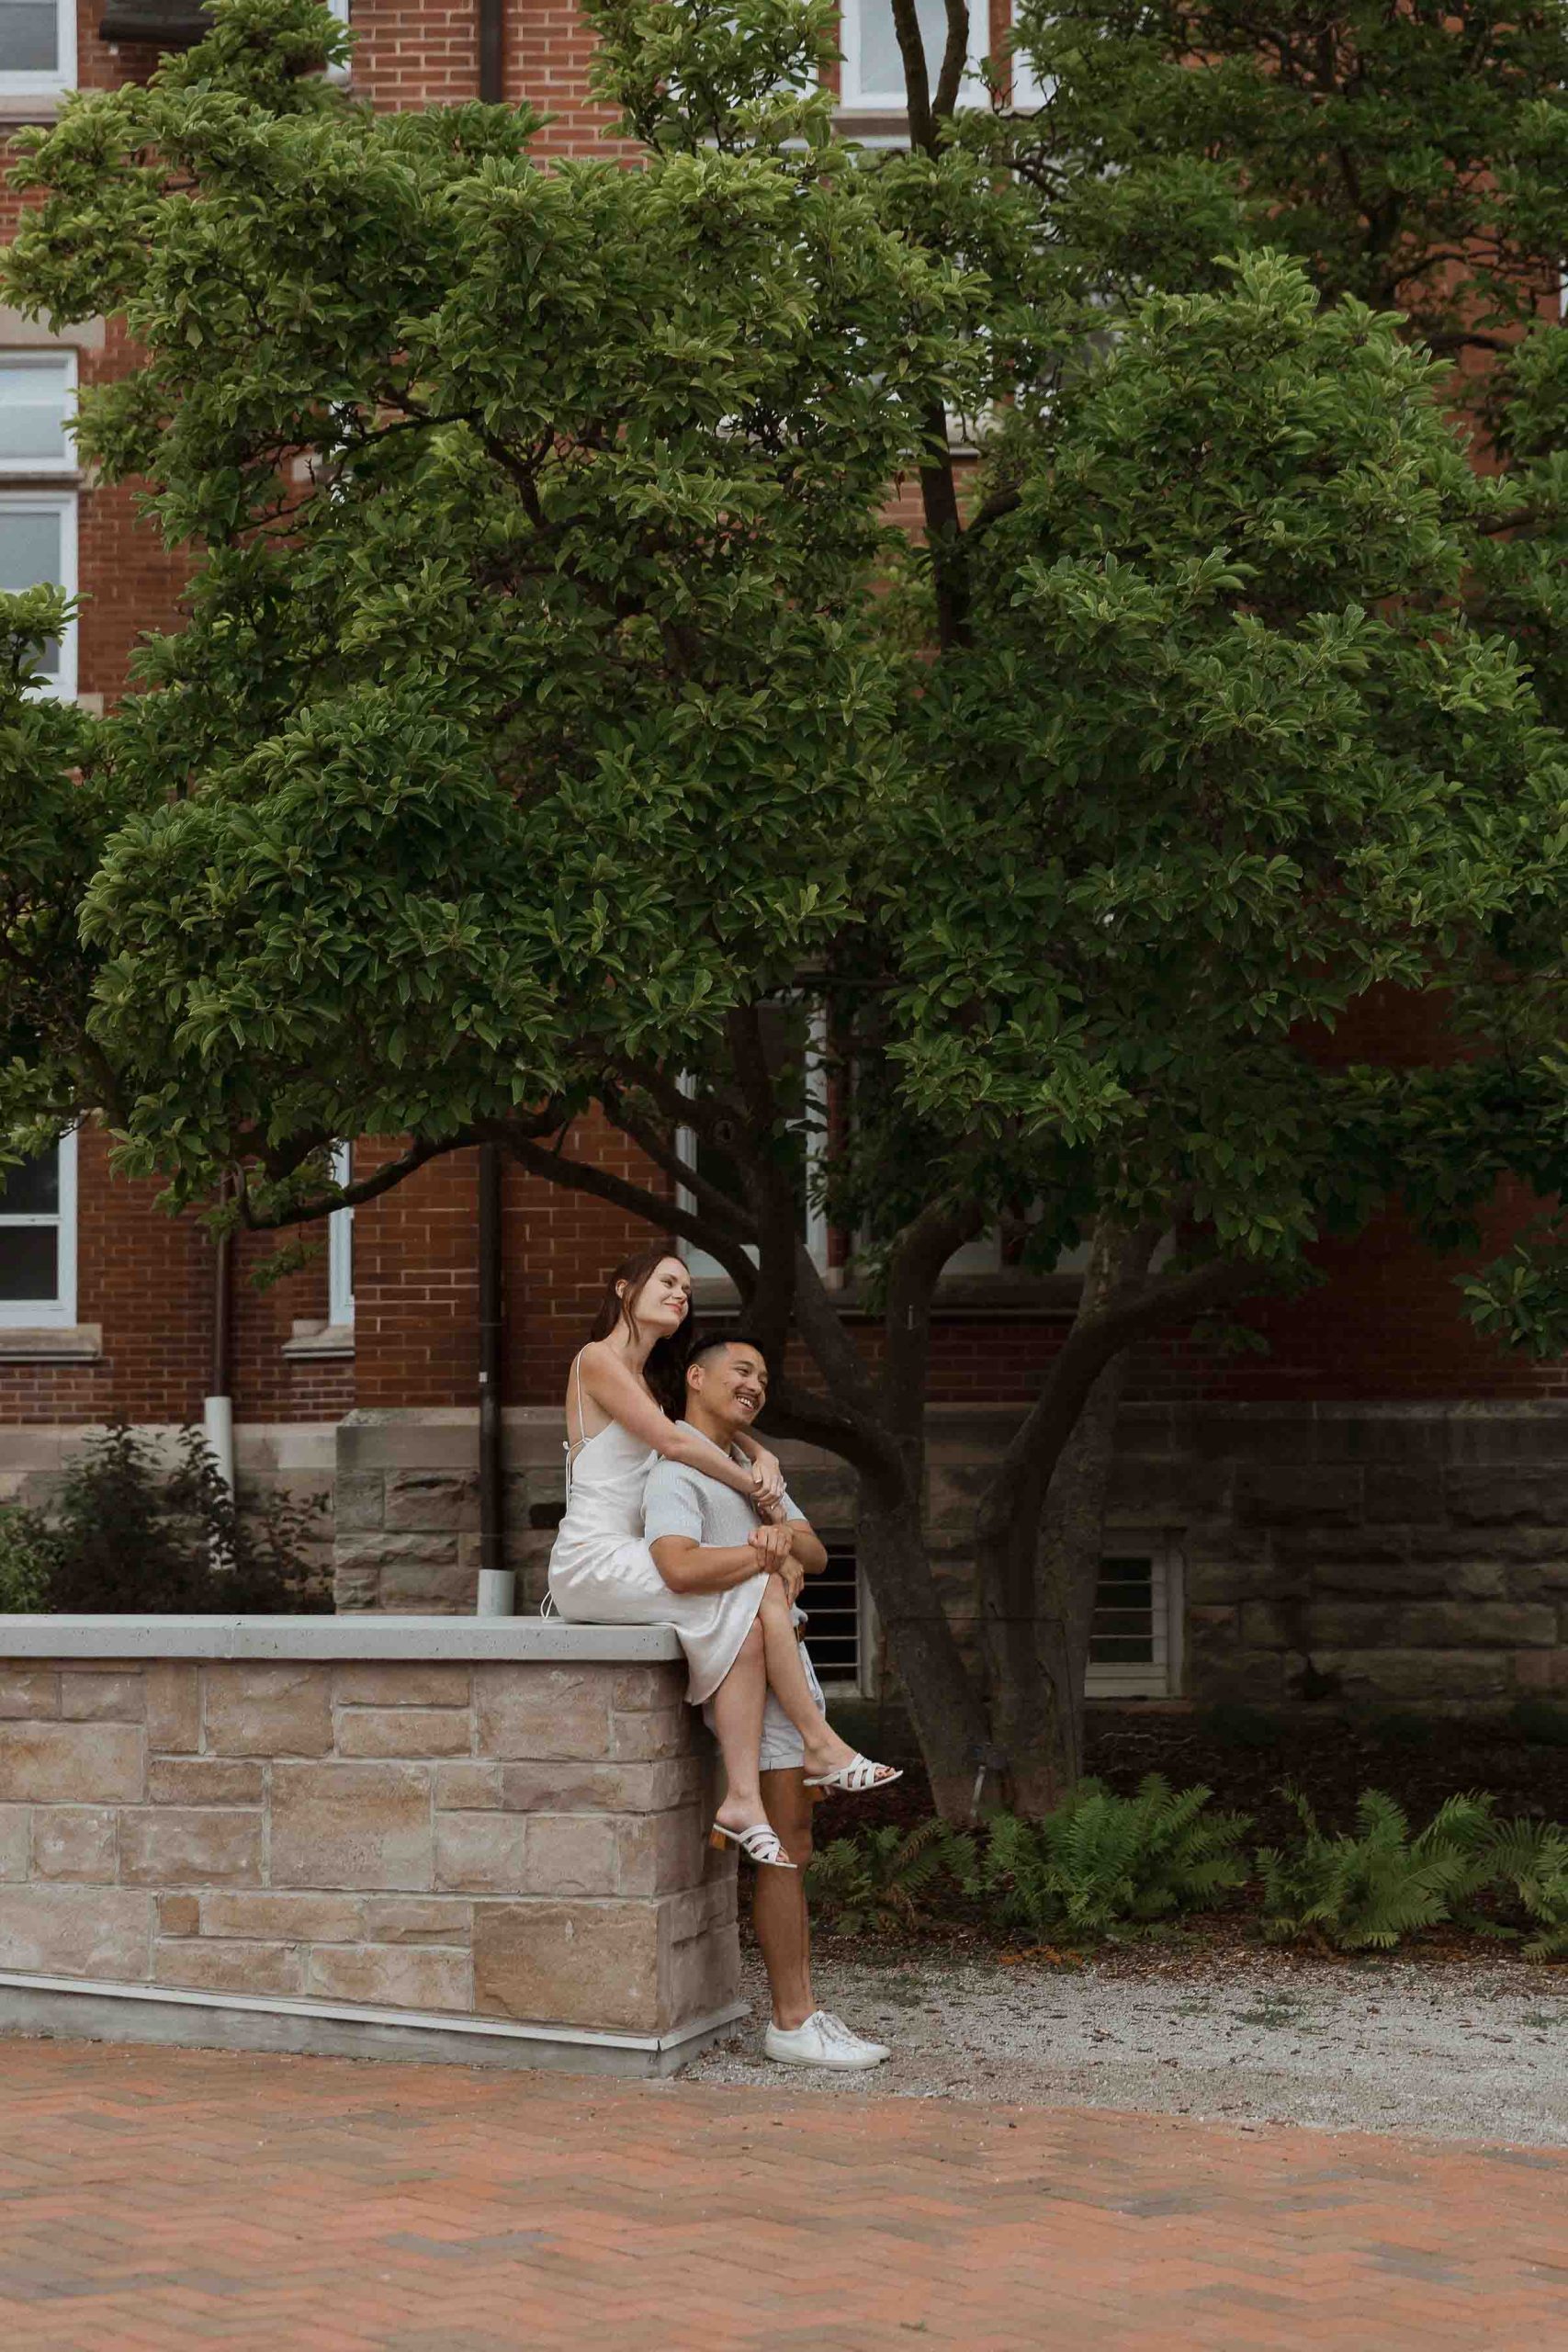 Engagement photos at Guelph University outside the old buildings | Sonia V Photography sitting on stone wall under tree